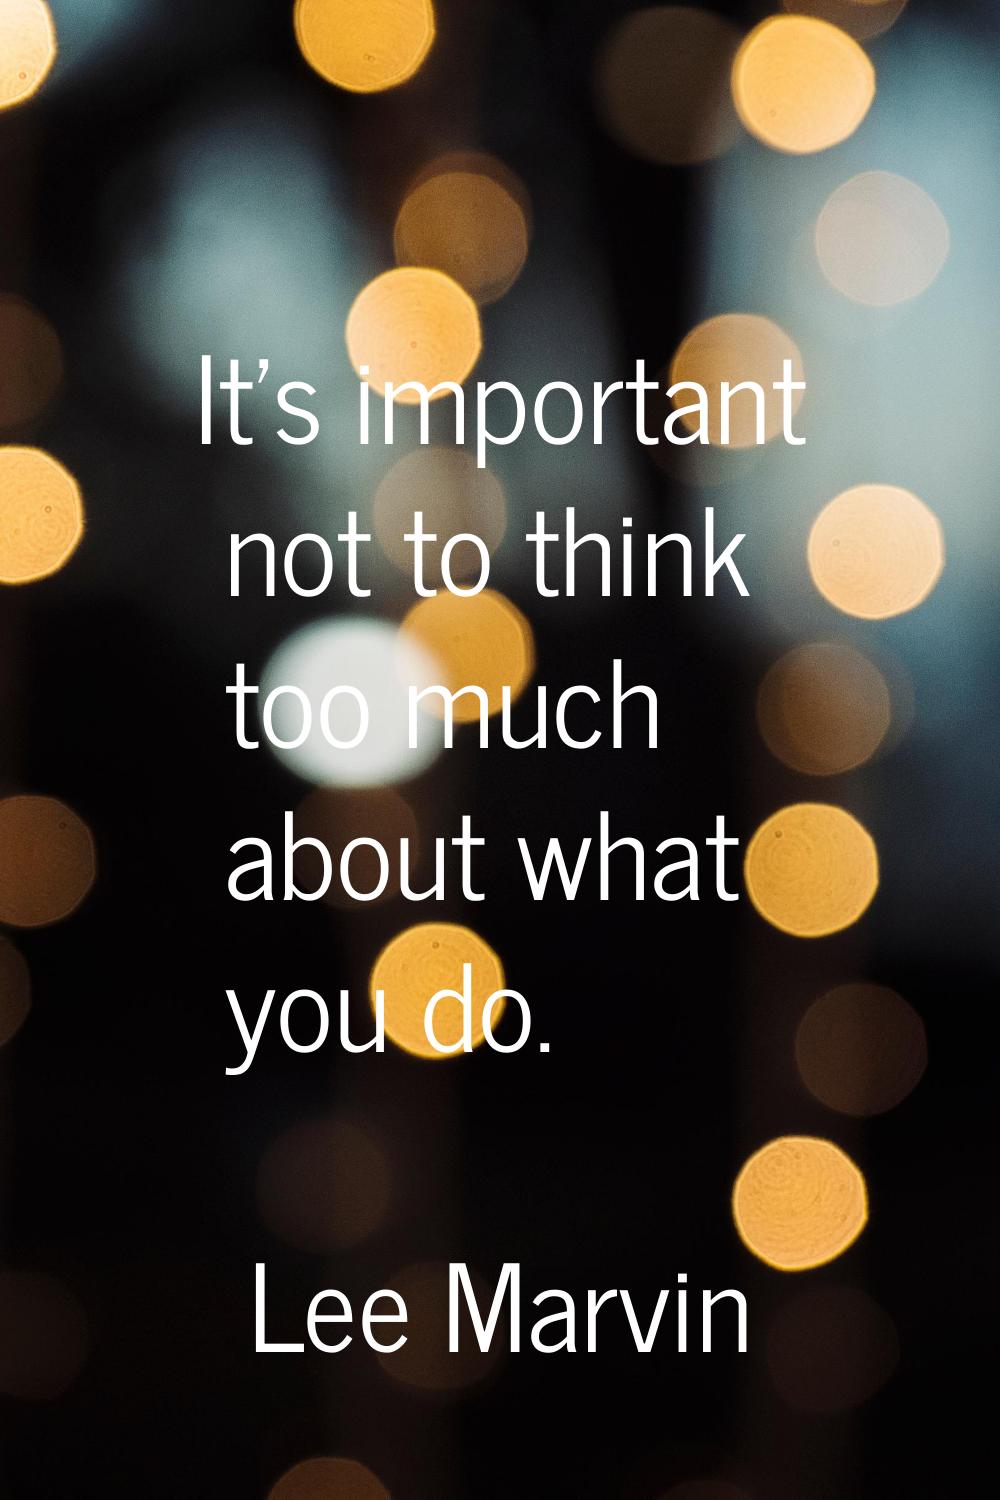 It's important not to think too much about what you do.